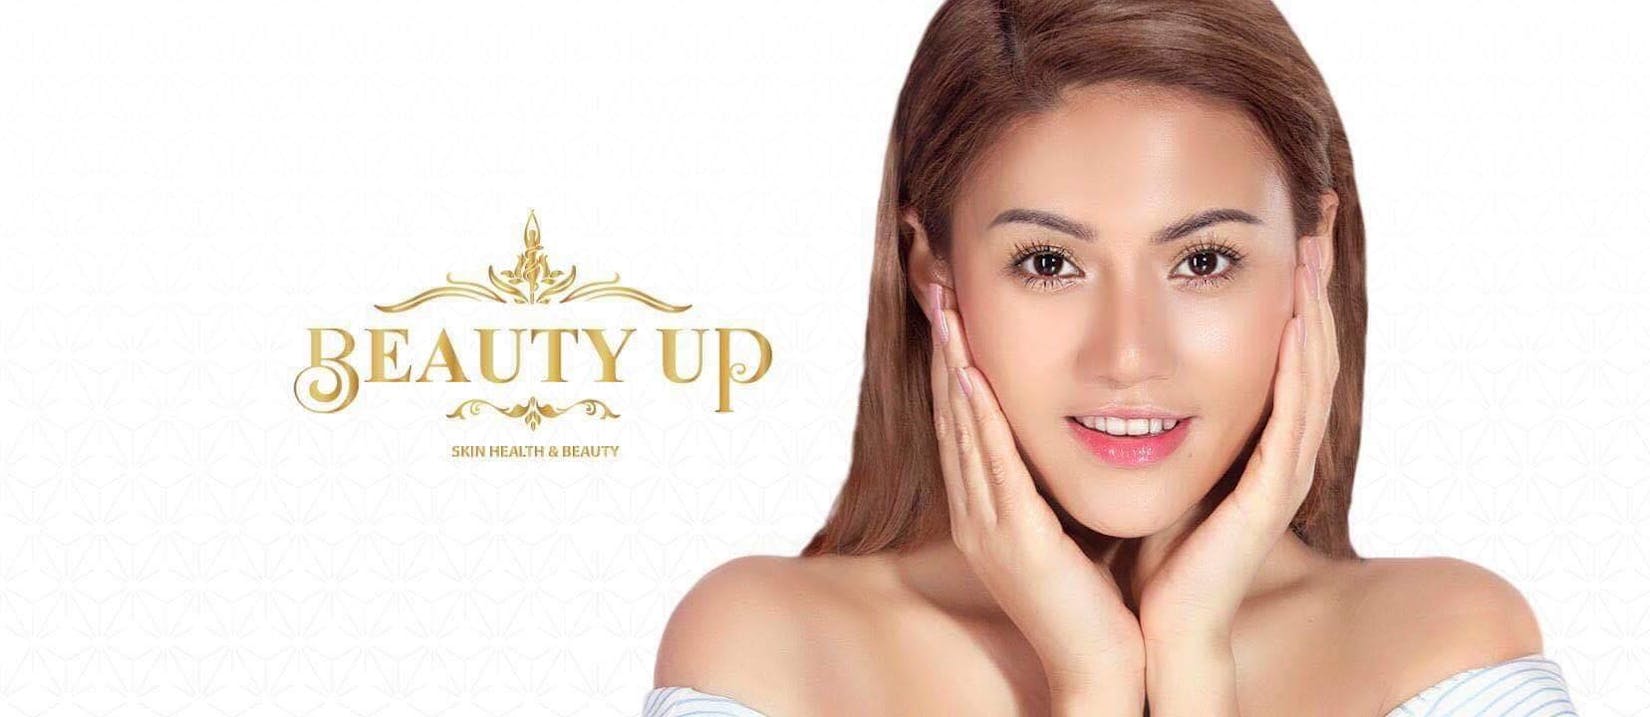 Beauty Up (Skin and Aesthetic Centre)s | Beauty